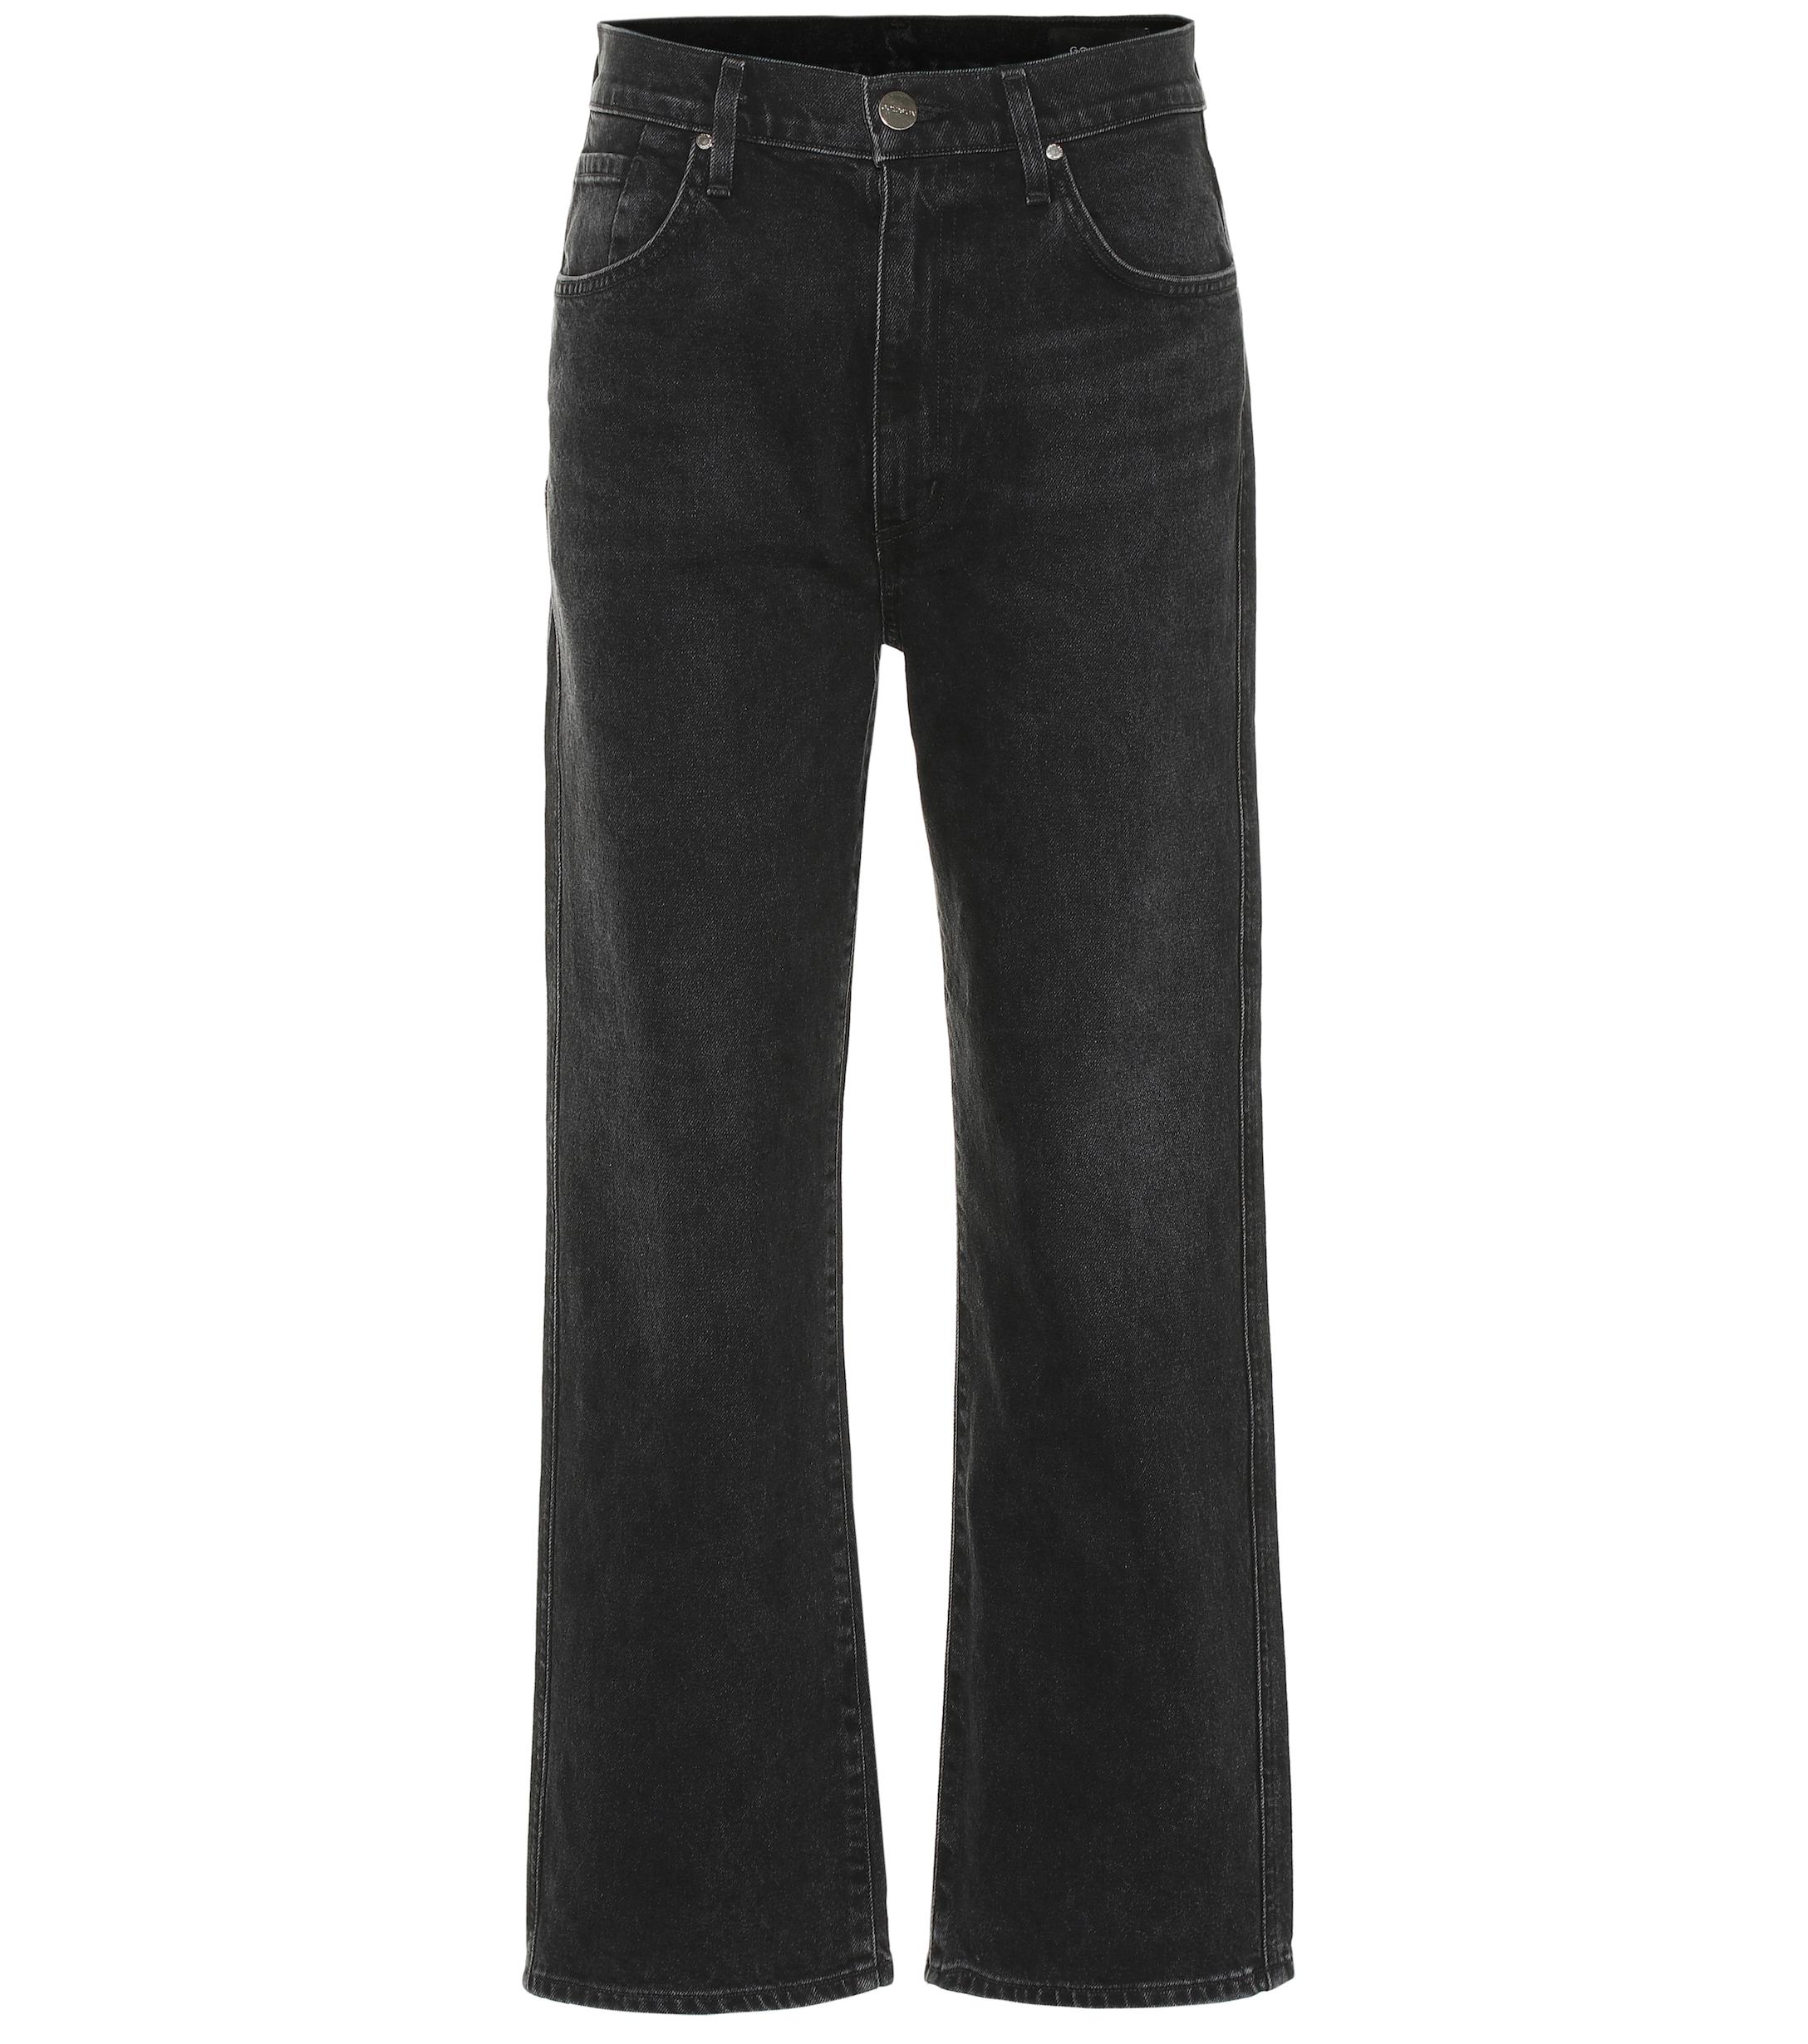 Goldsign Denim The Cropped A High-rise Jeans in Black - Lyst